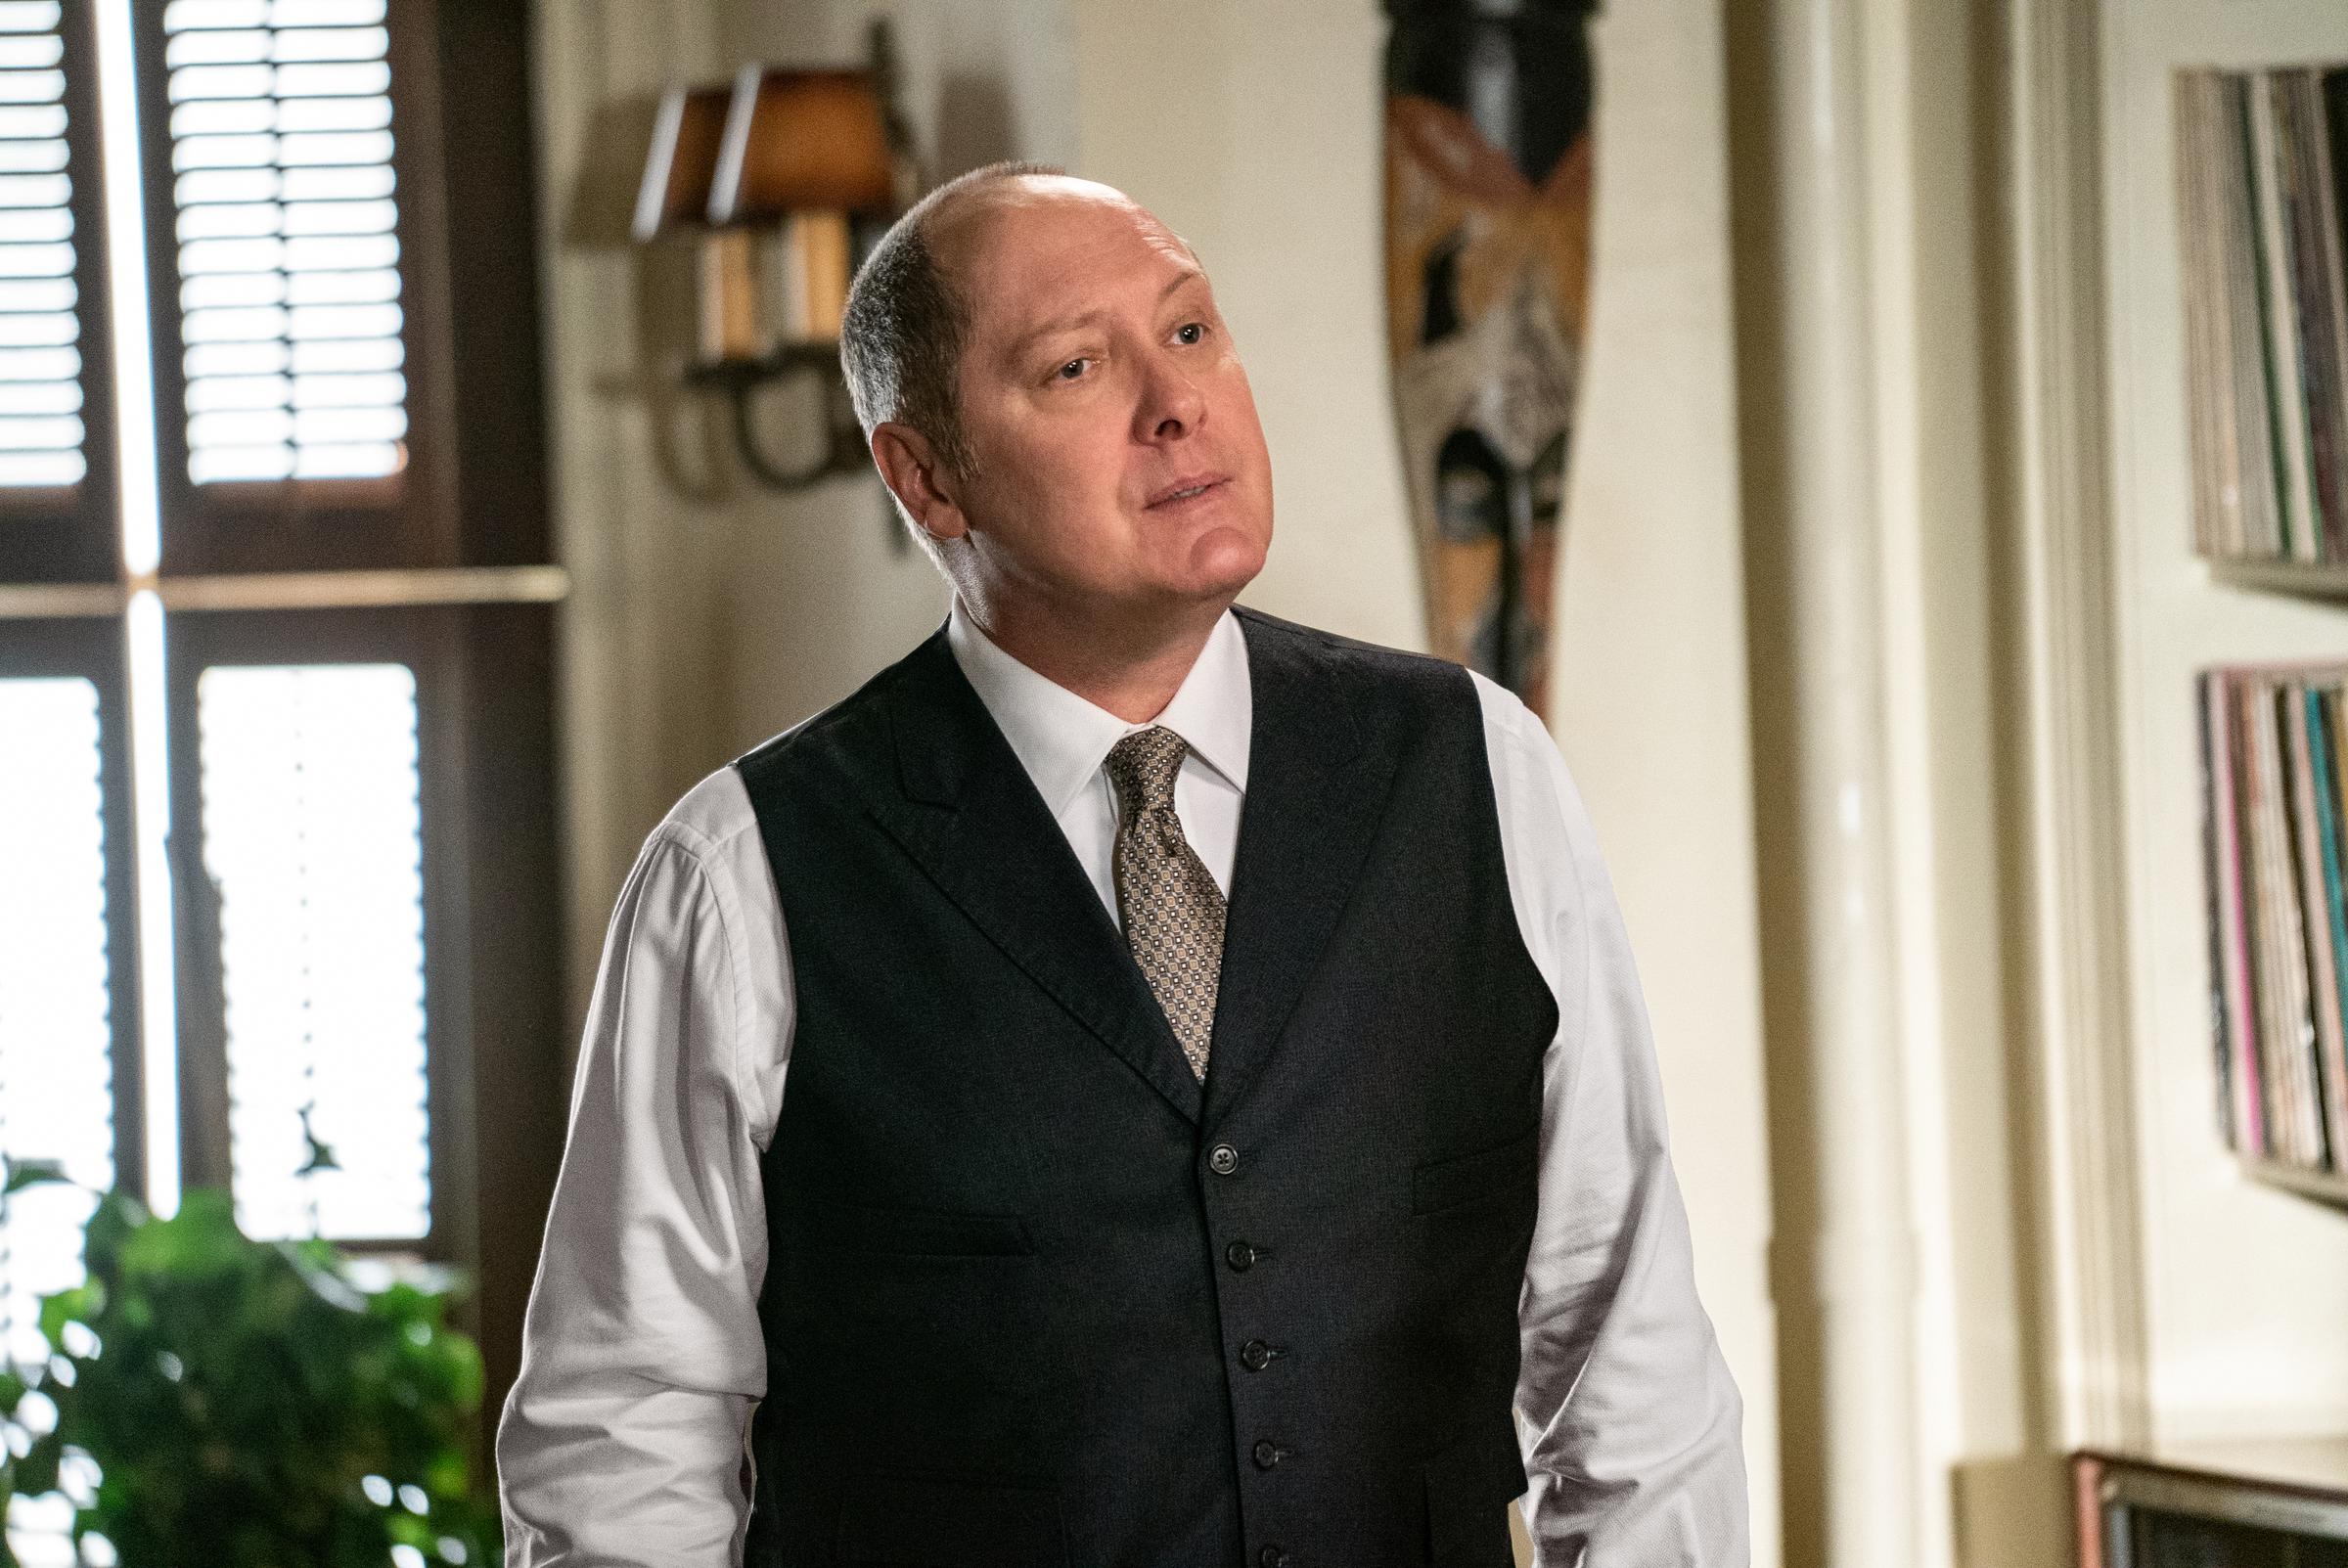 James Spader as Raymond "Red" Reddington in "The Blacklist" season 6 in 2019 | Source: Getty Images